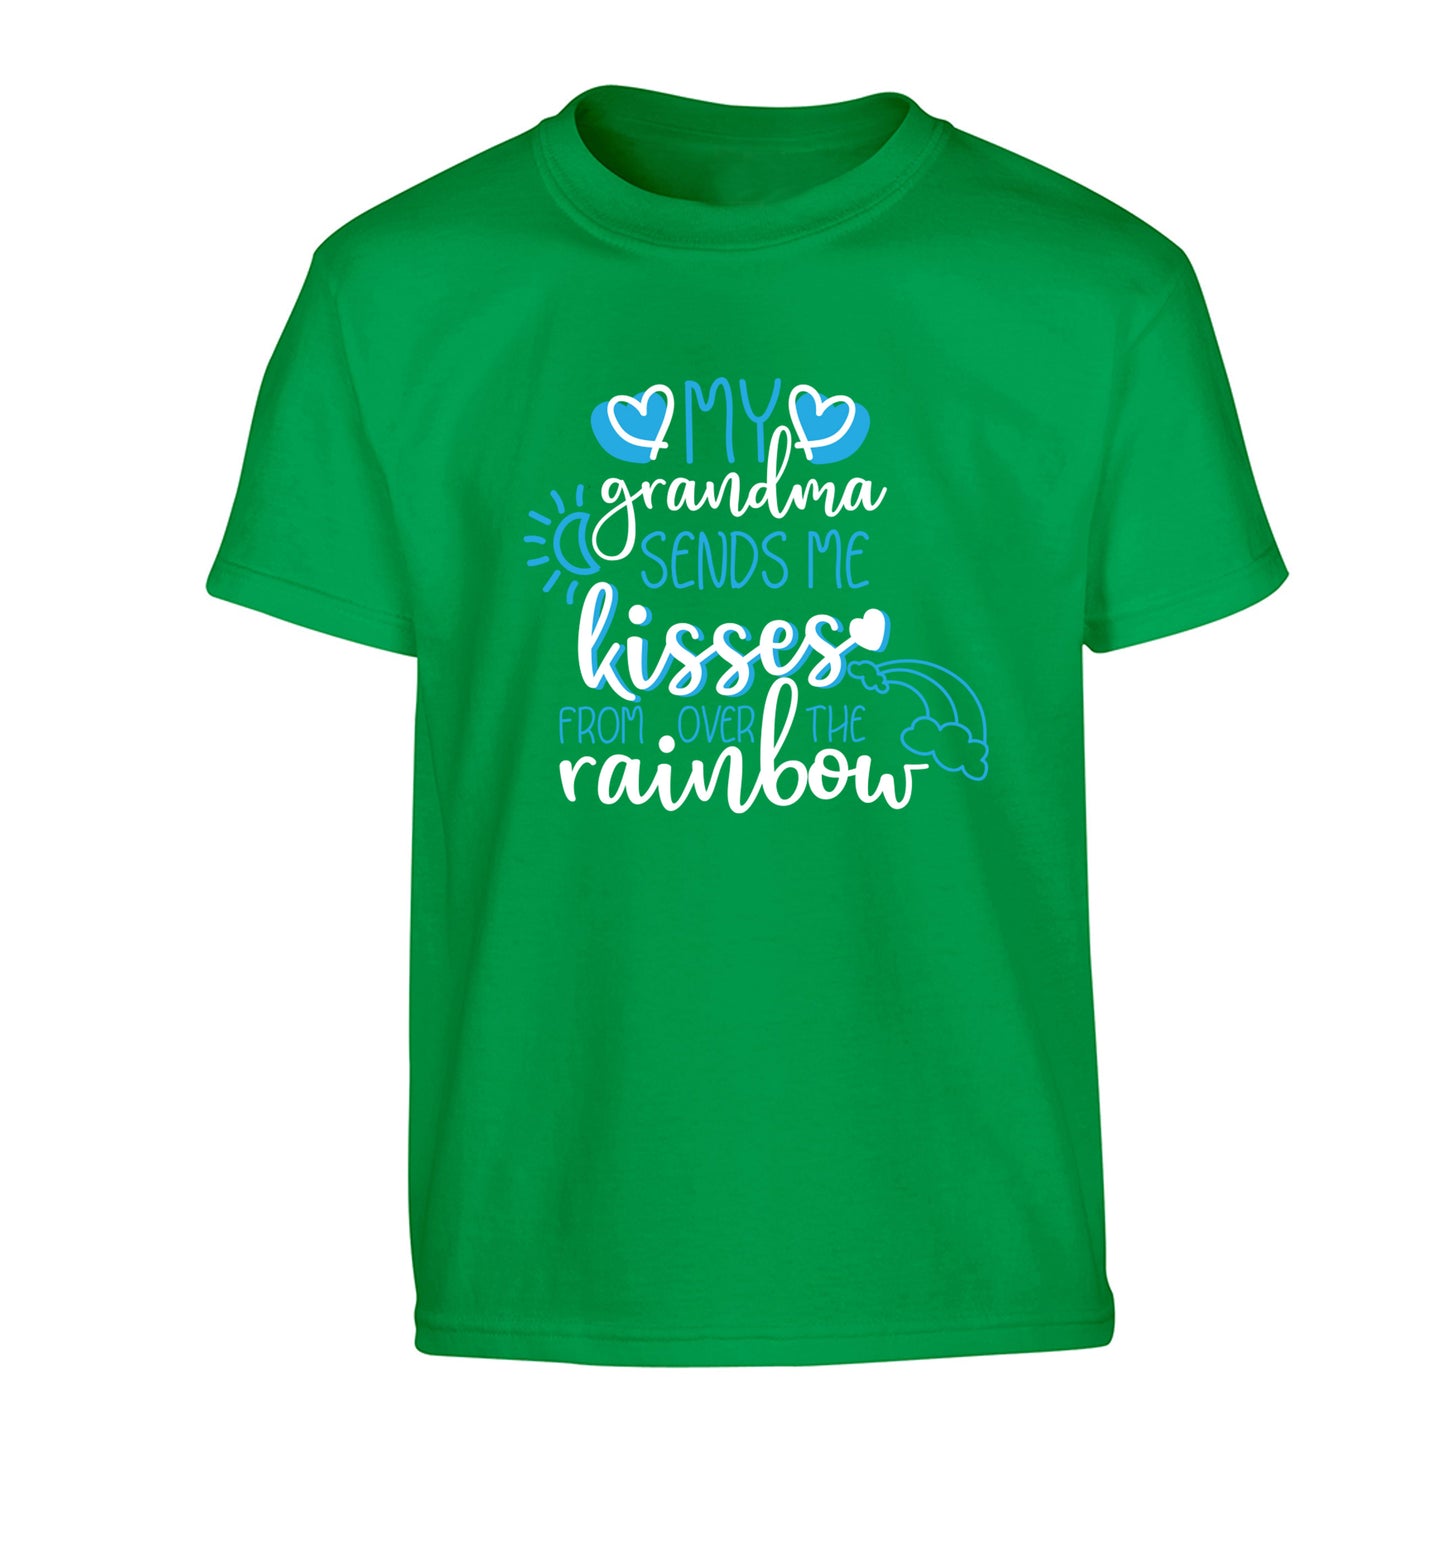 My grandma sends me kisses from over the rainbow Children's green Tshirt 12-13 Years